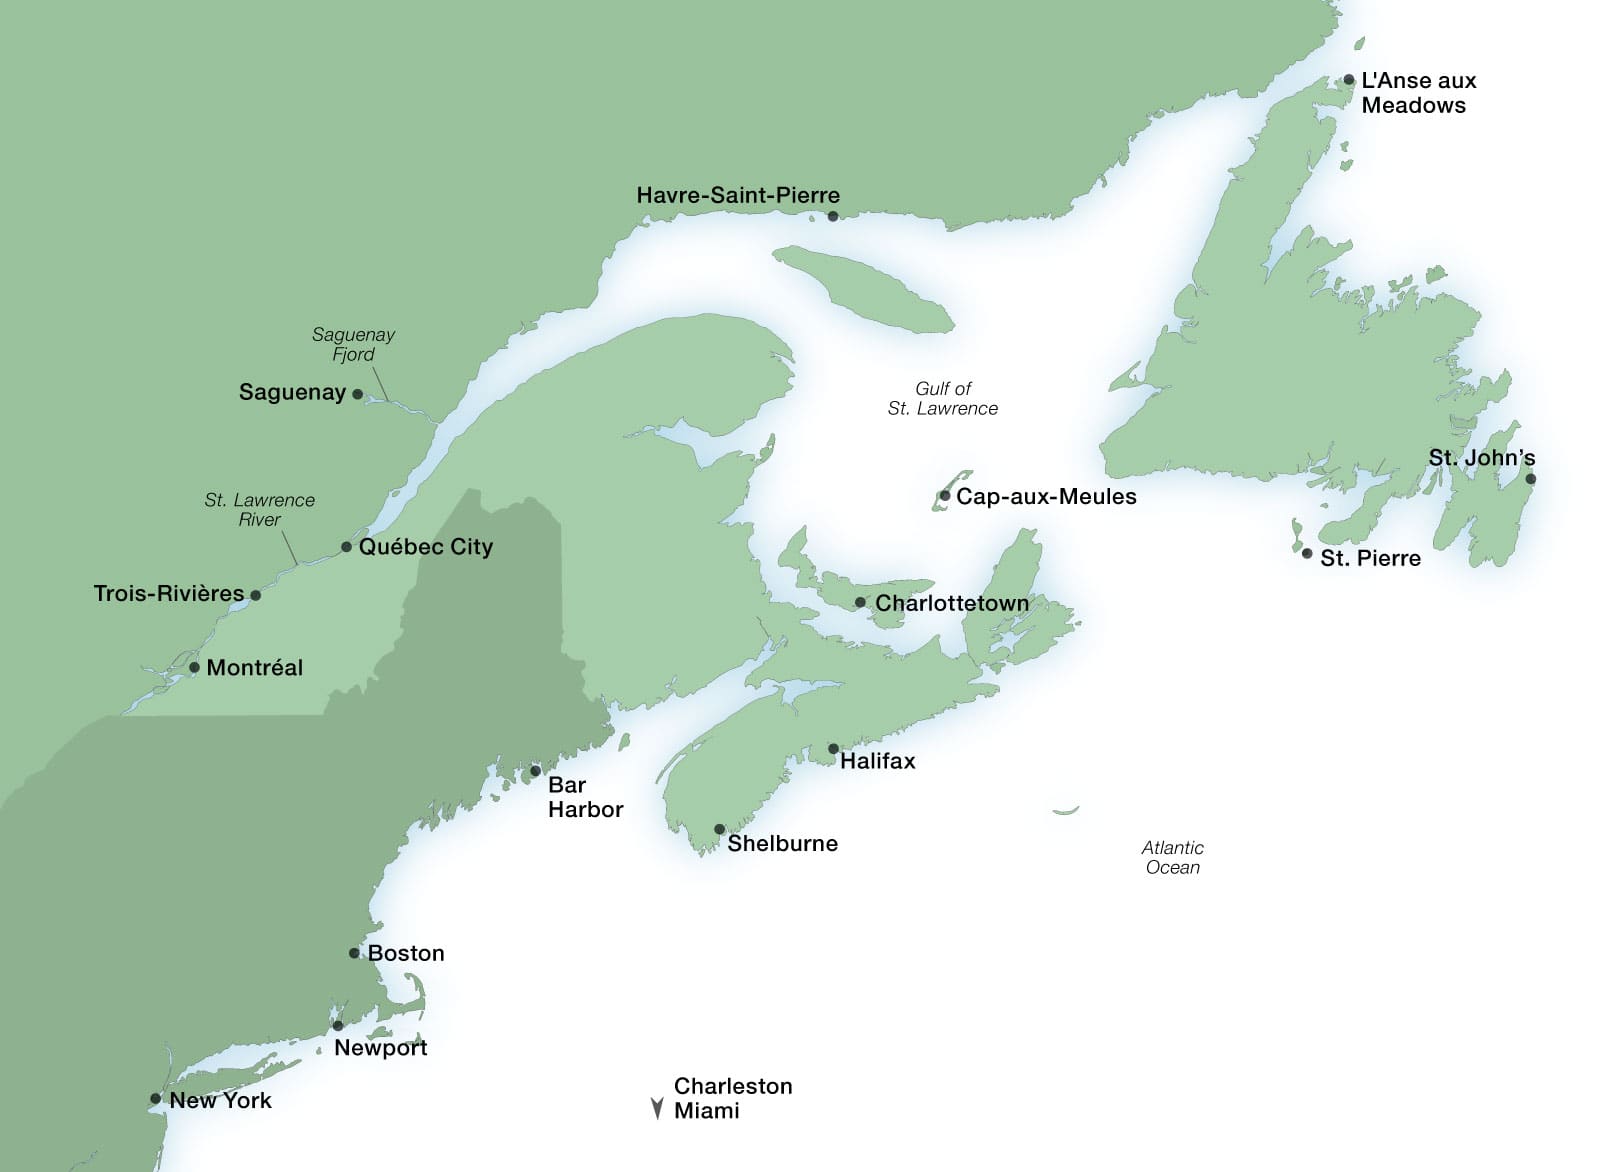 Seabourn's Canada & New England ports map